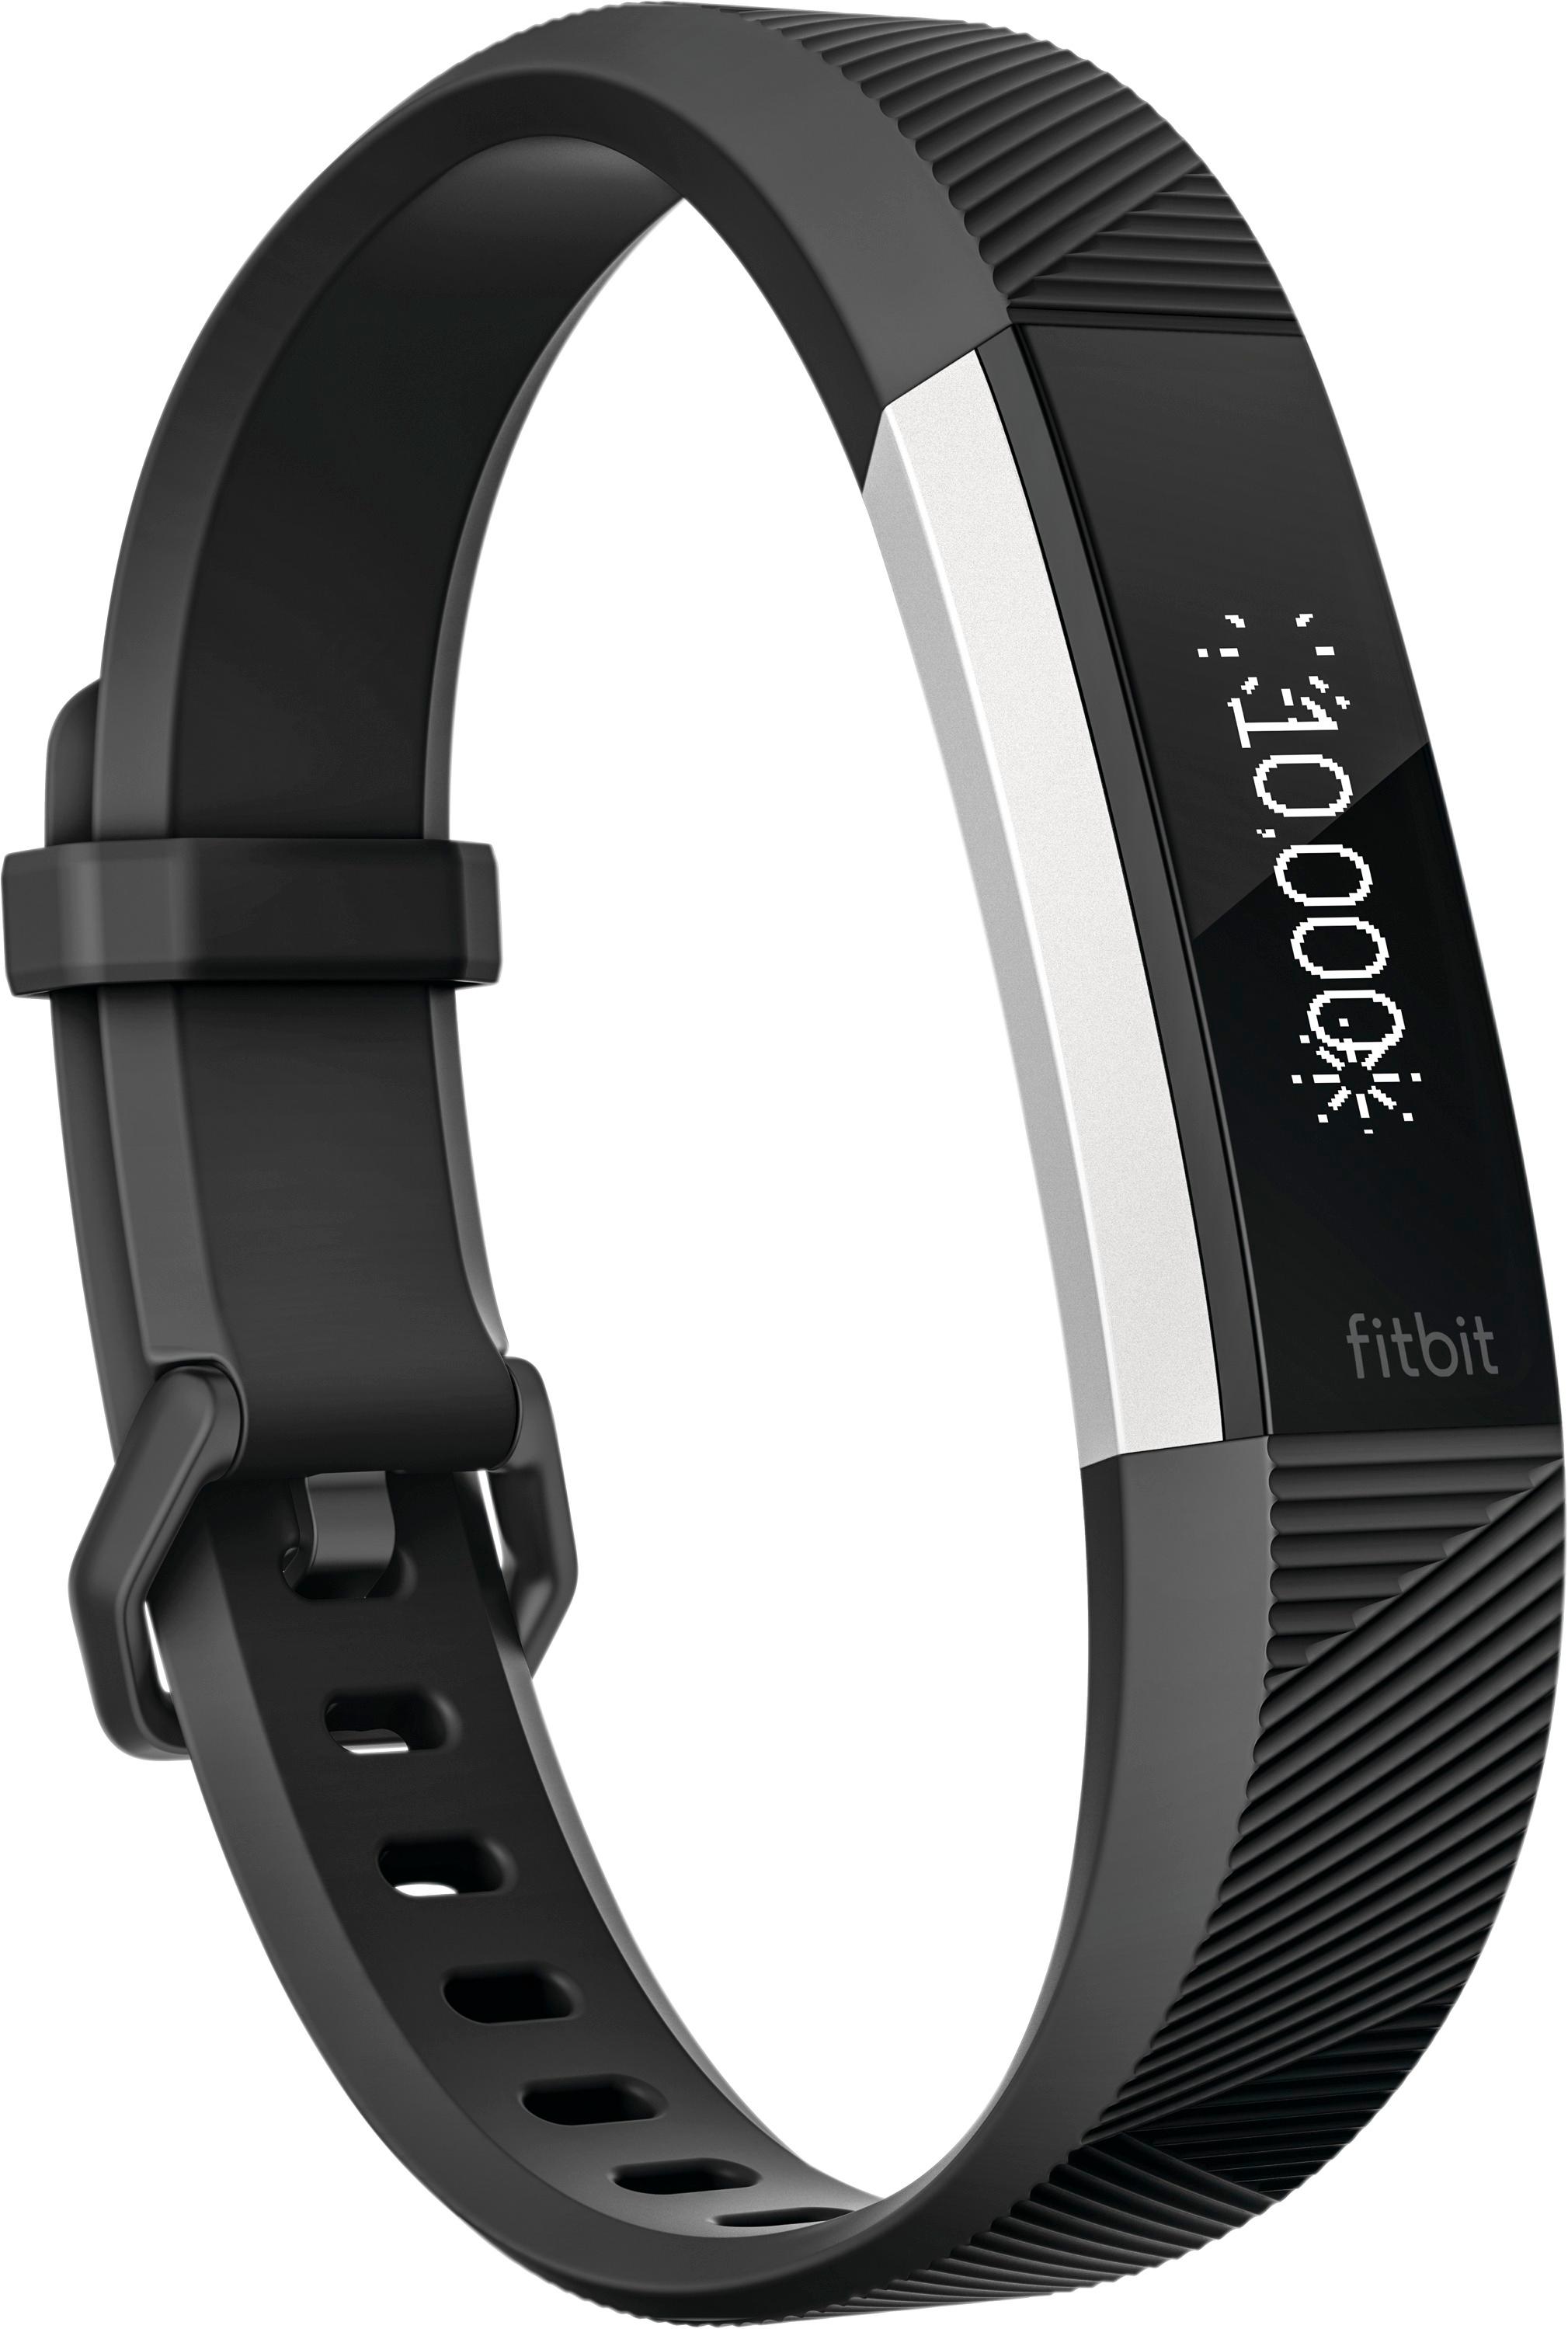 xl fitbit band